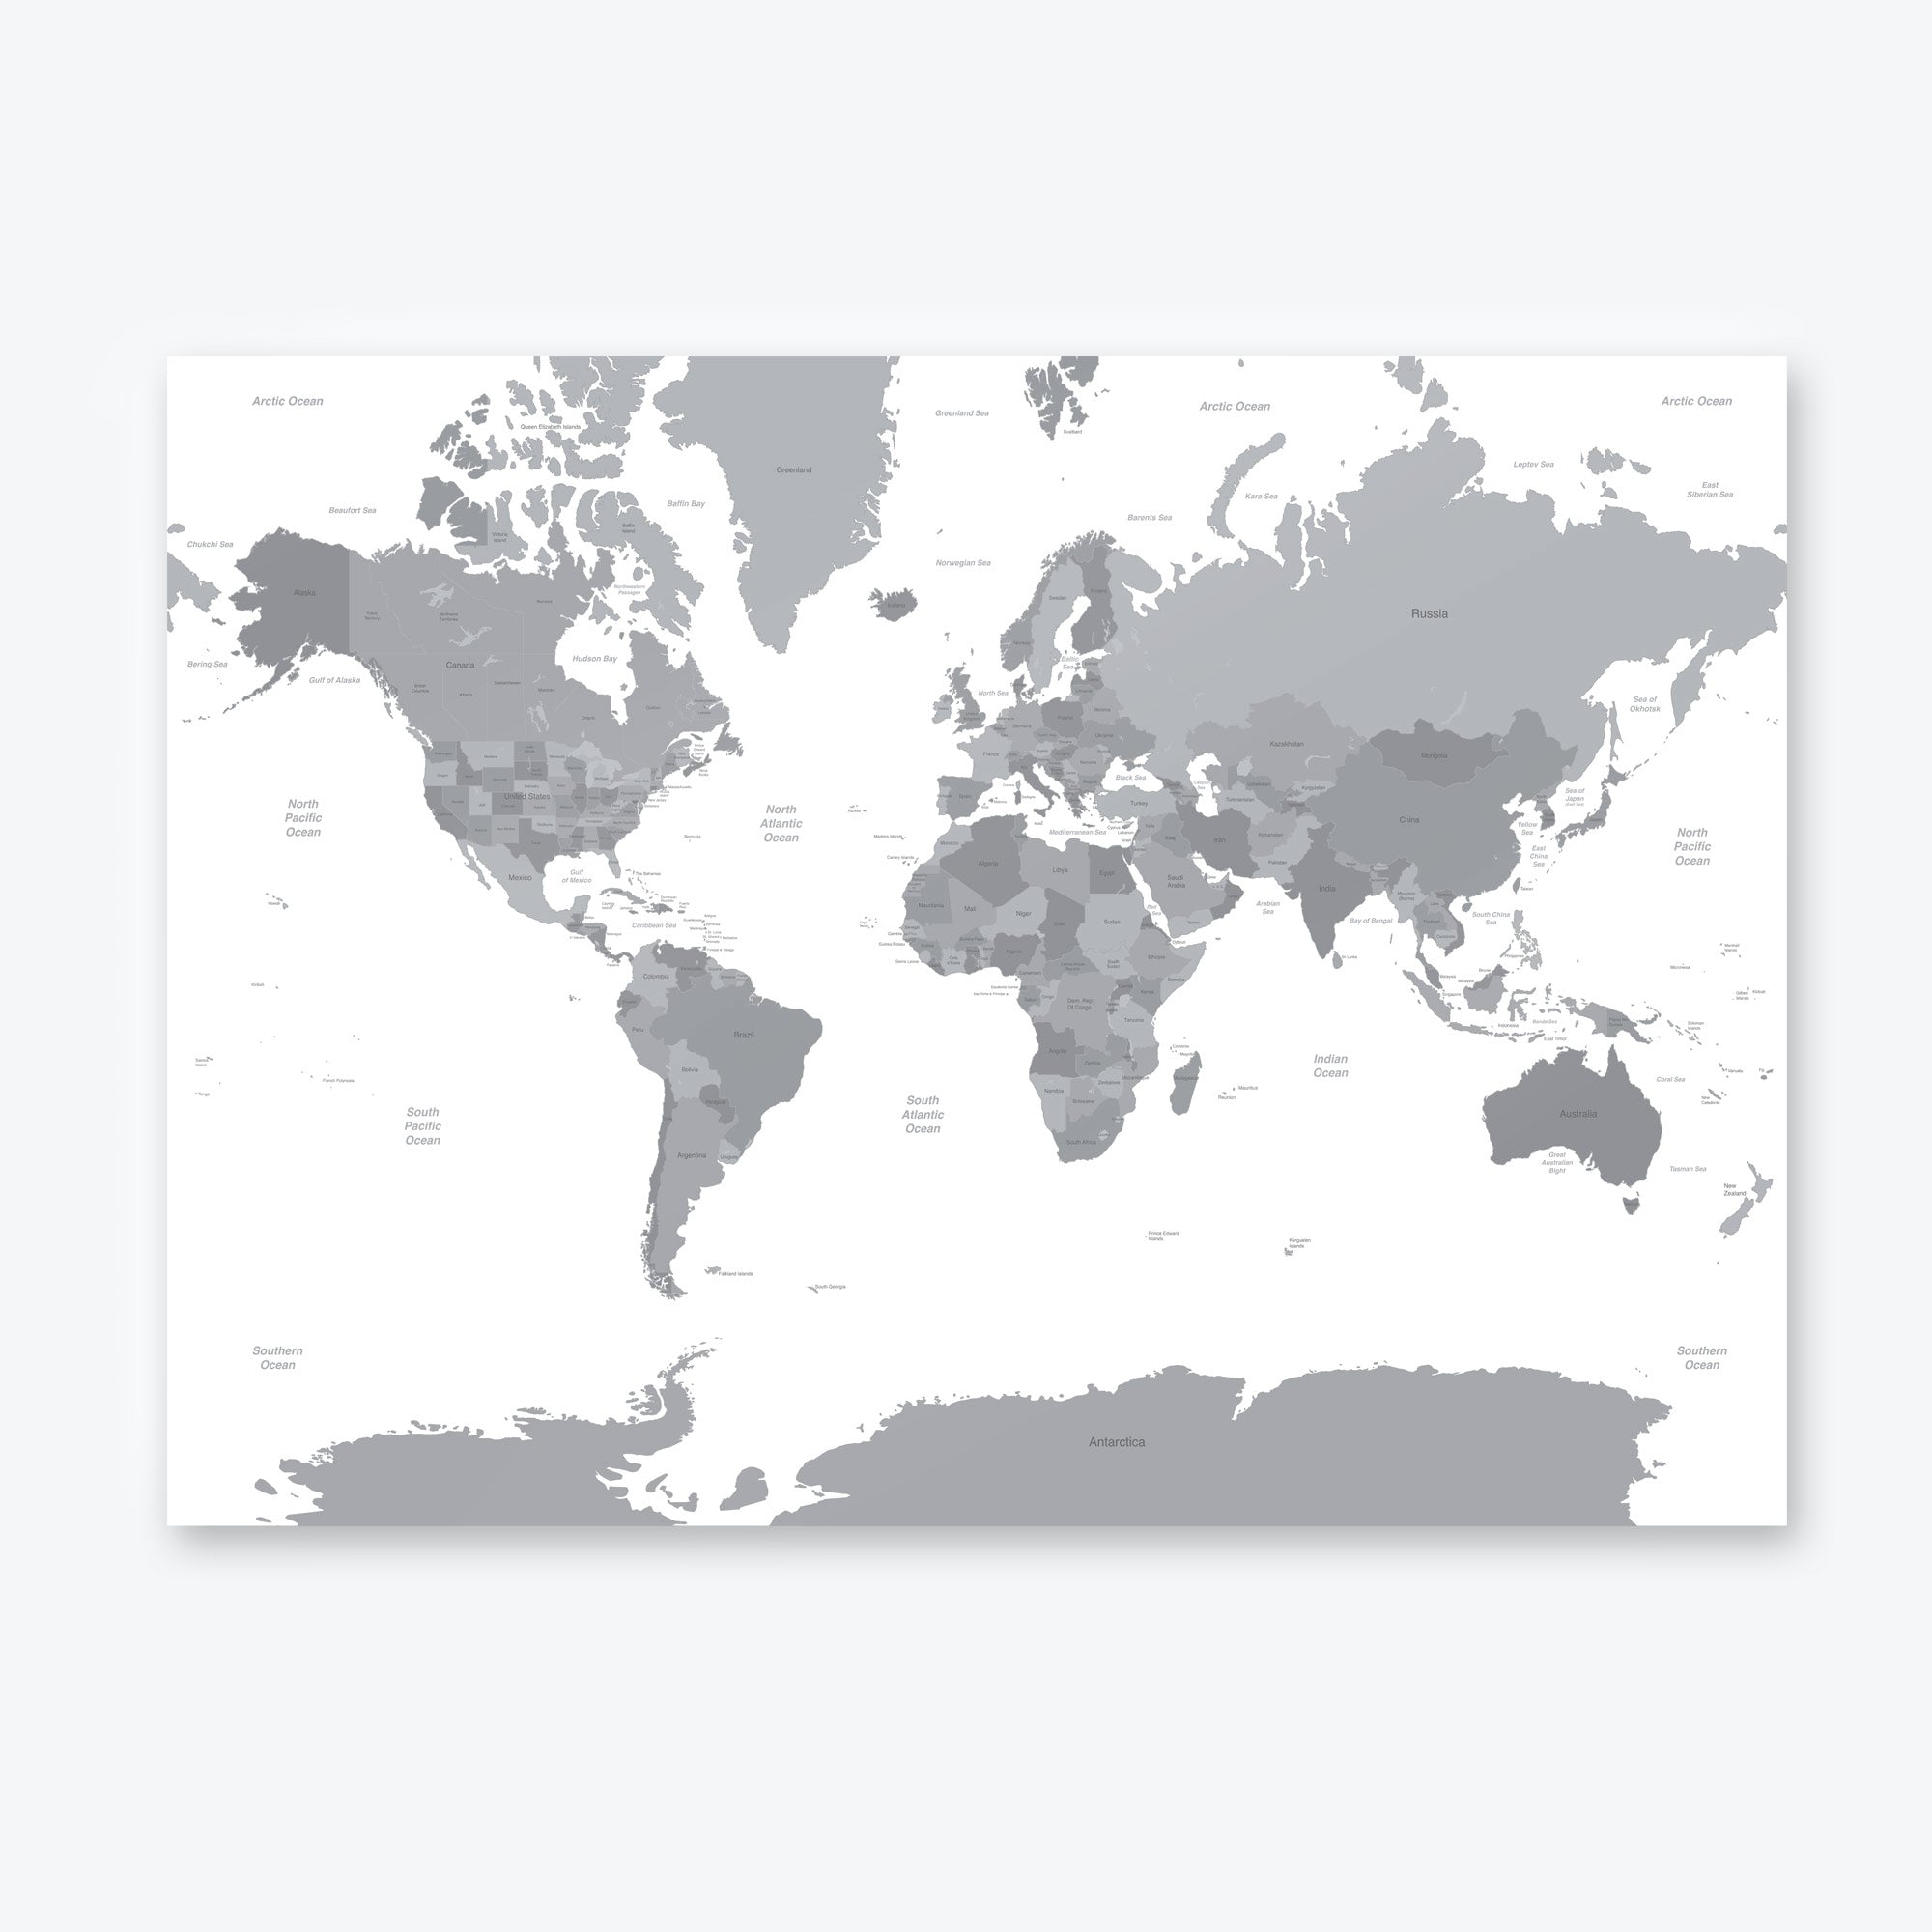 Grey Countries and White Sea Map of the World